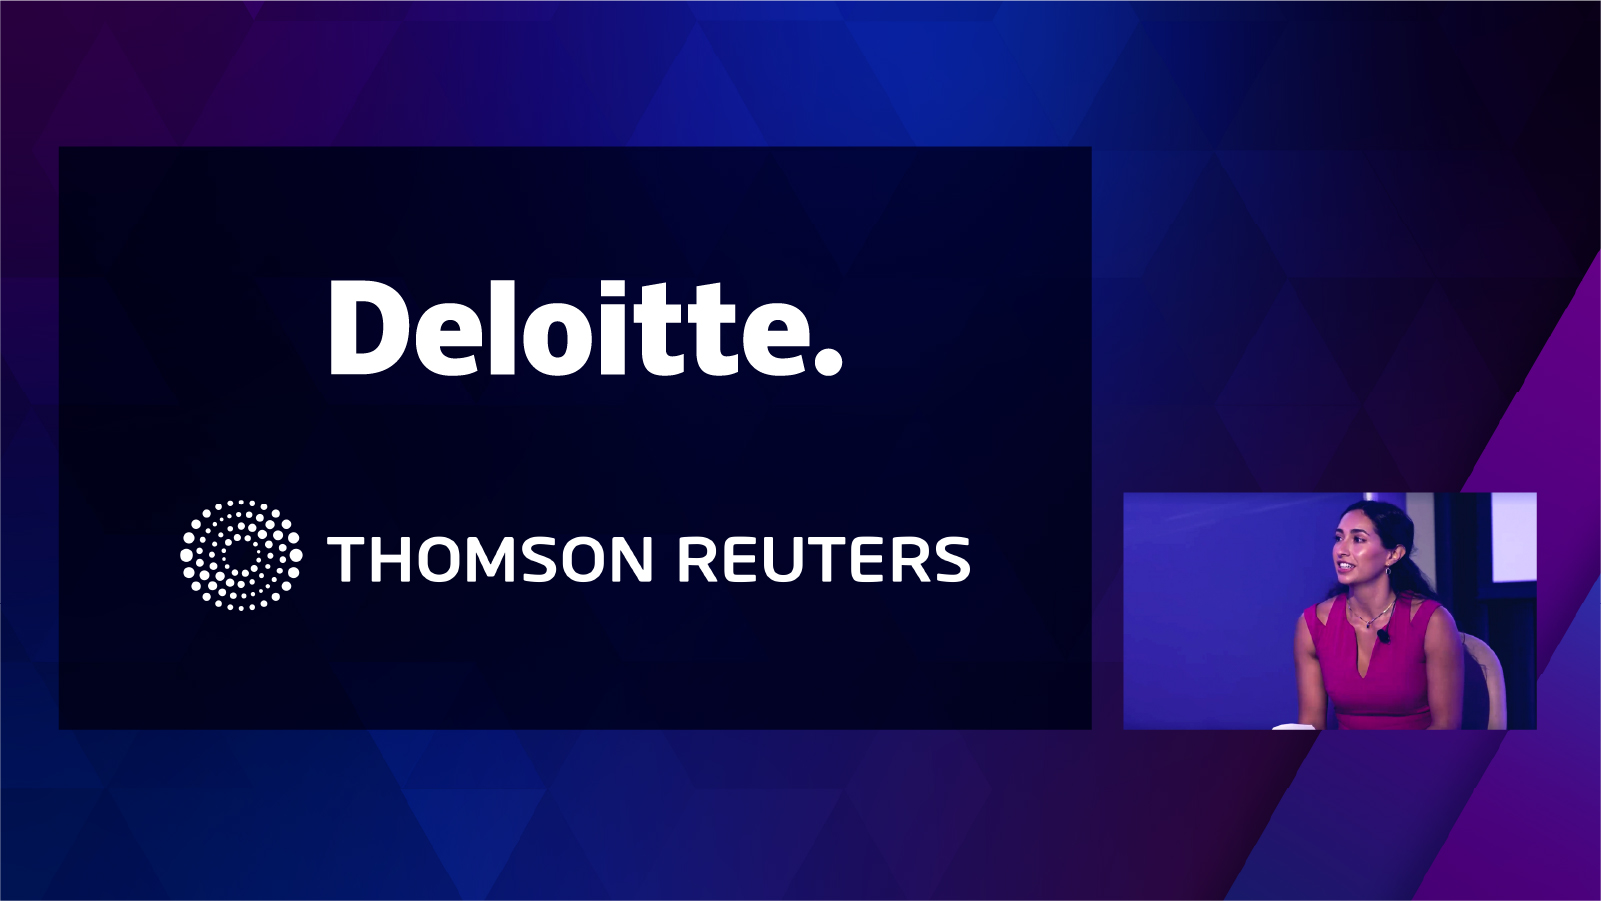 Graphic: Deloitte and Thomson Reuters logo with pip speaker